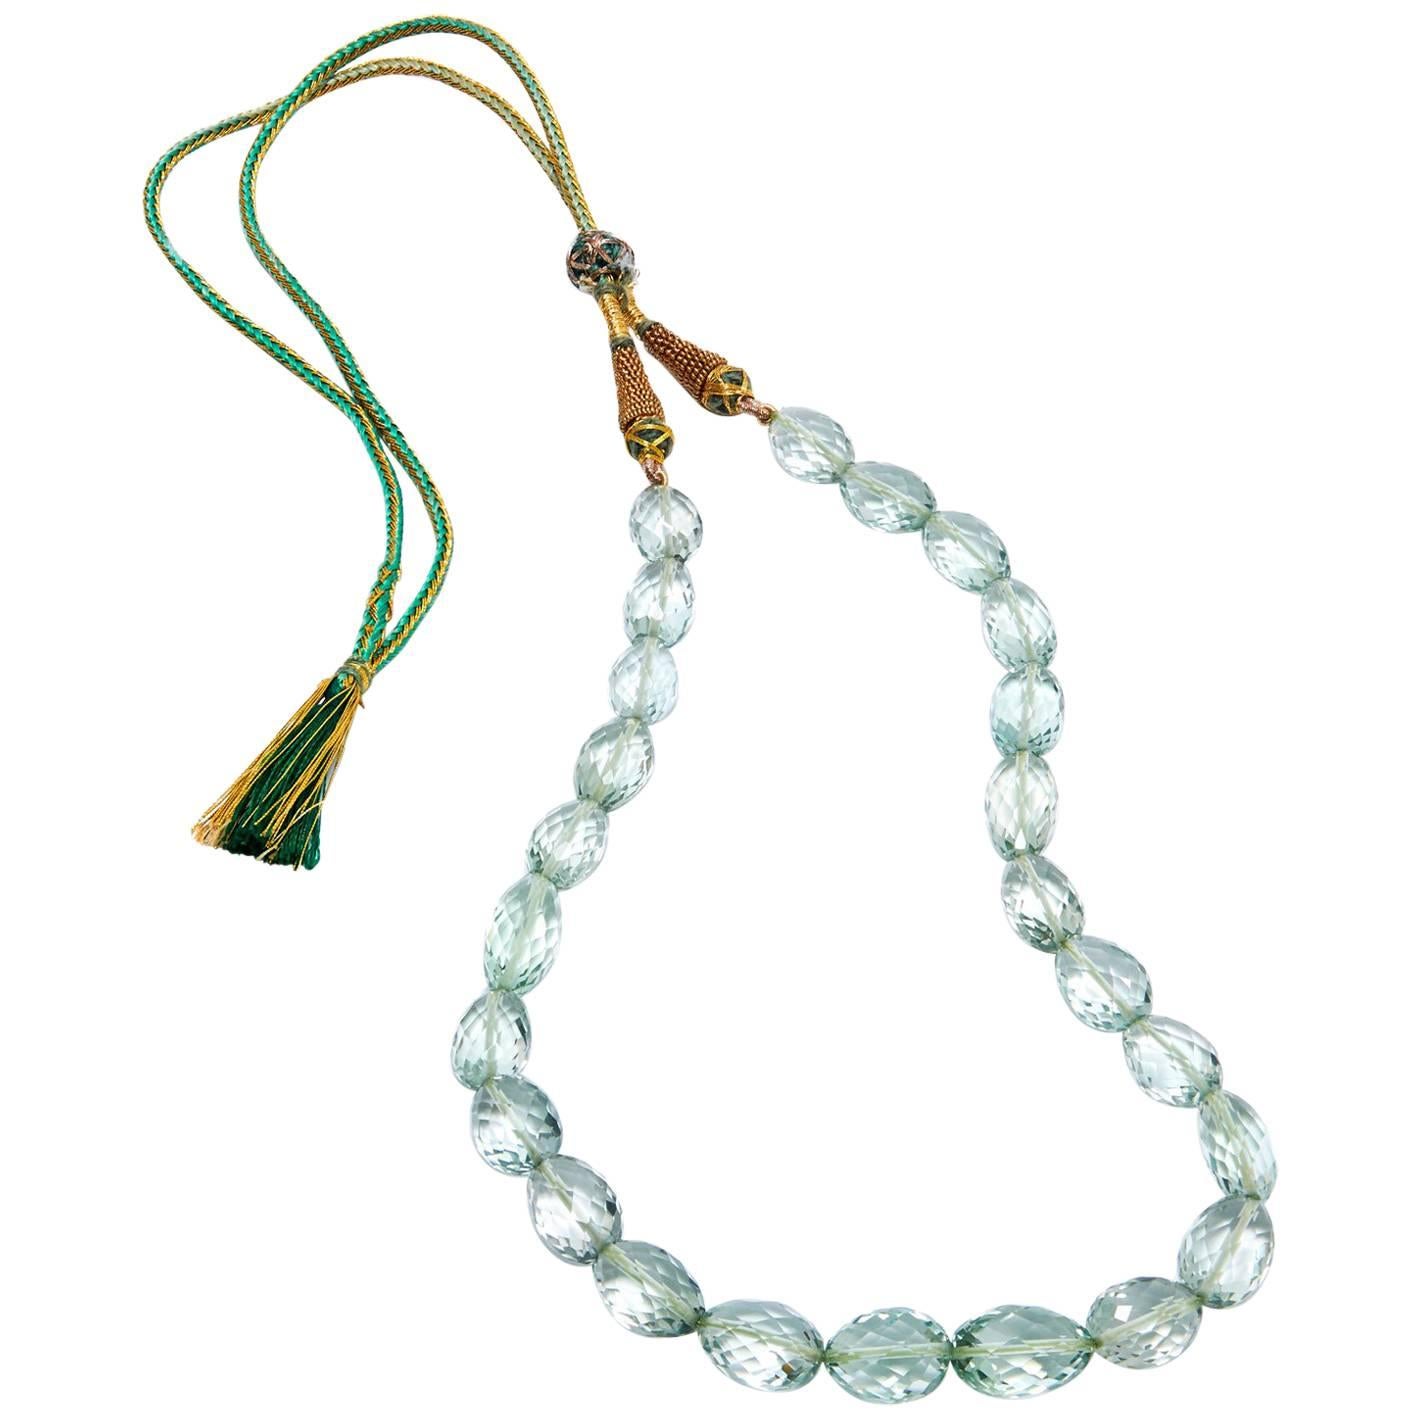 278.73 Carat Sea Green Prasiolite Beaded Necklace with Tassels 